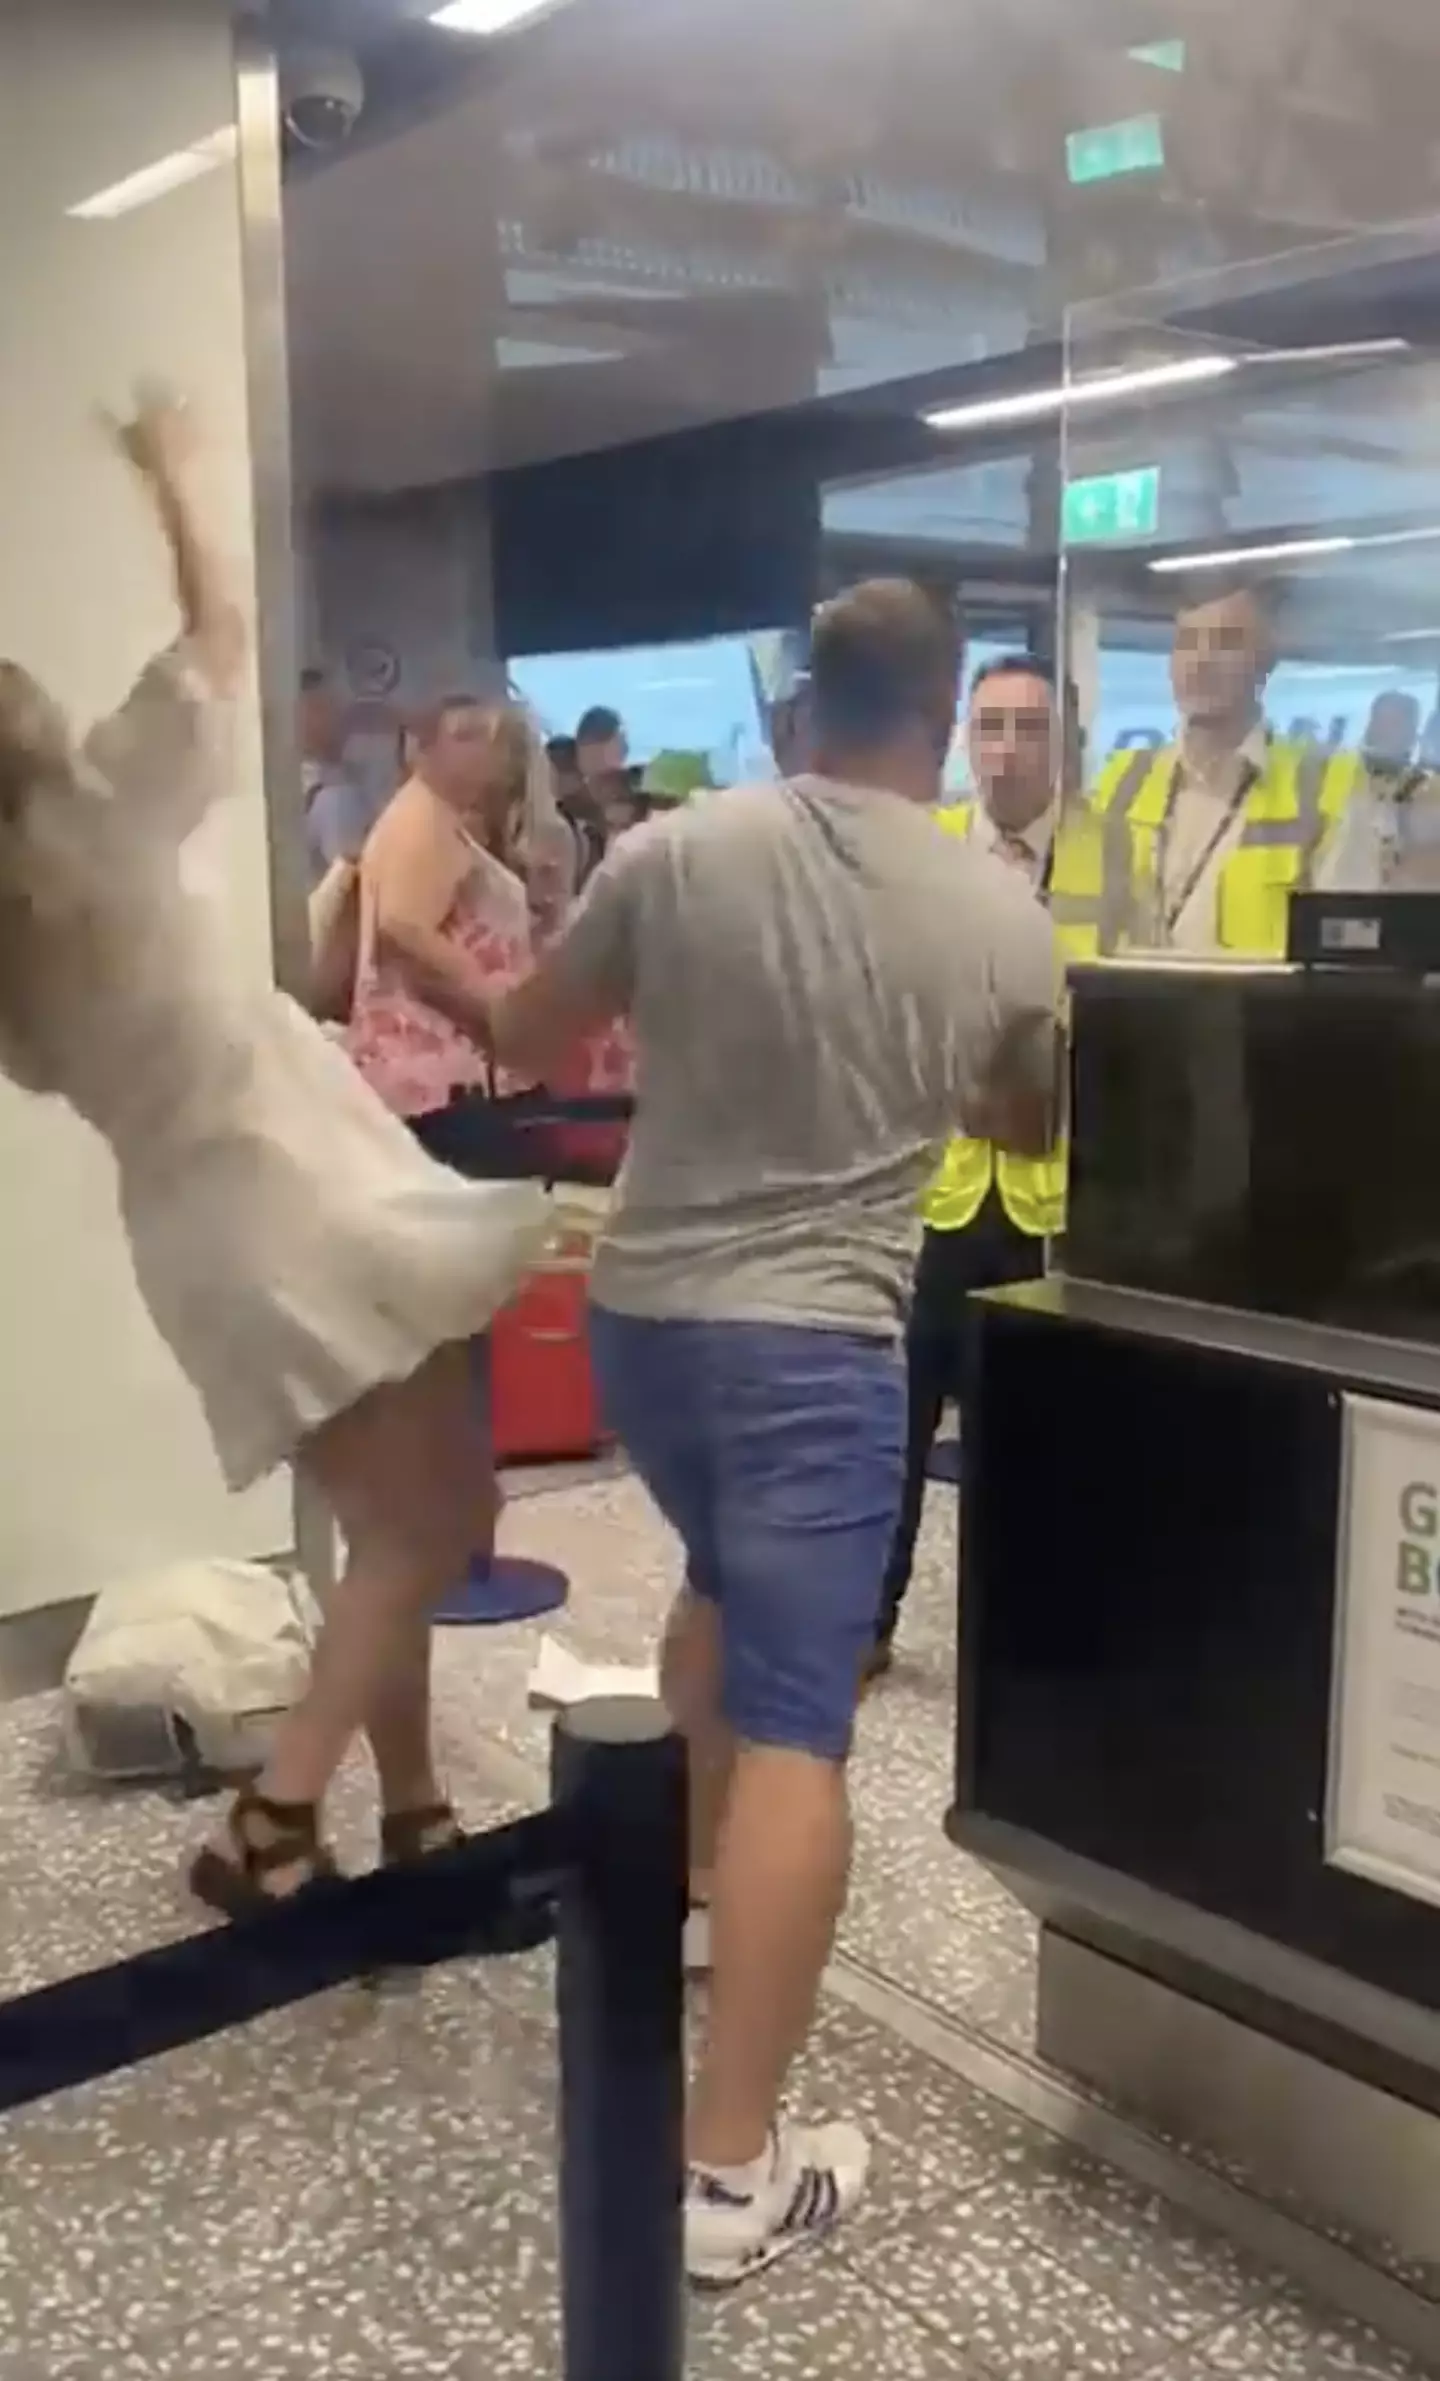 The man shoved the woman to the floor and then hit a member of staff.